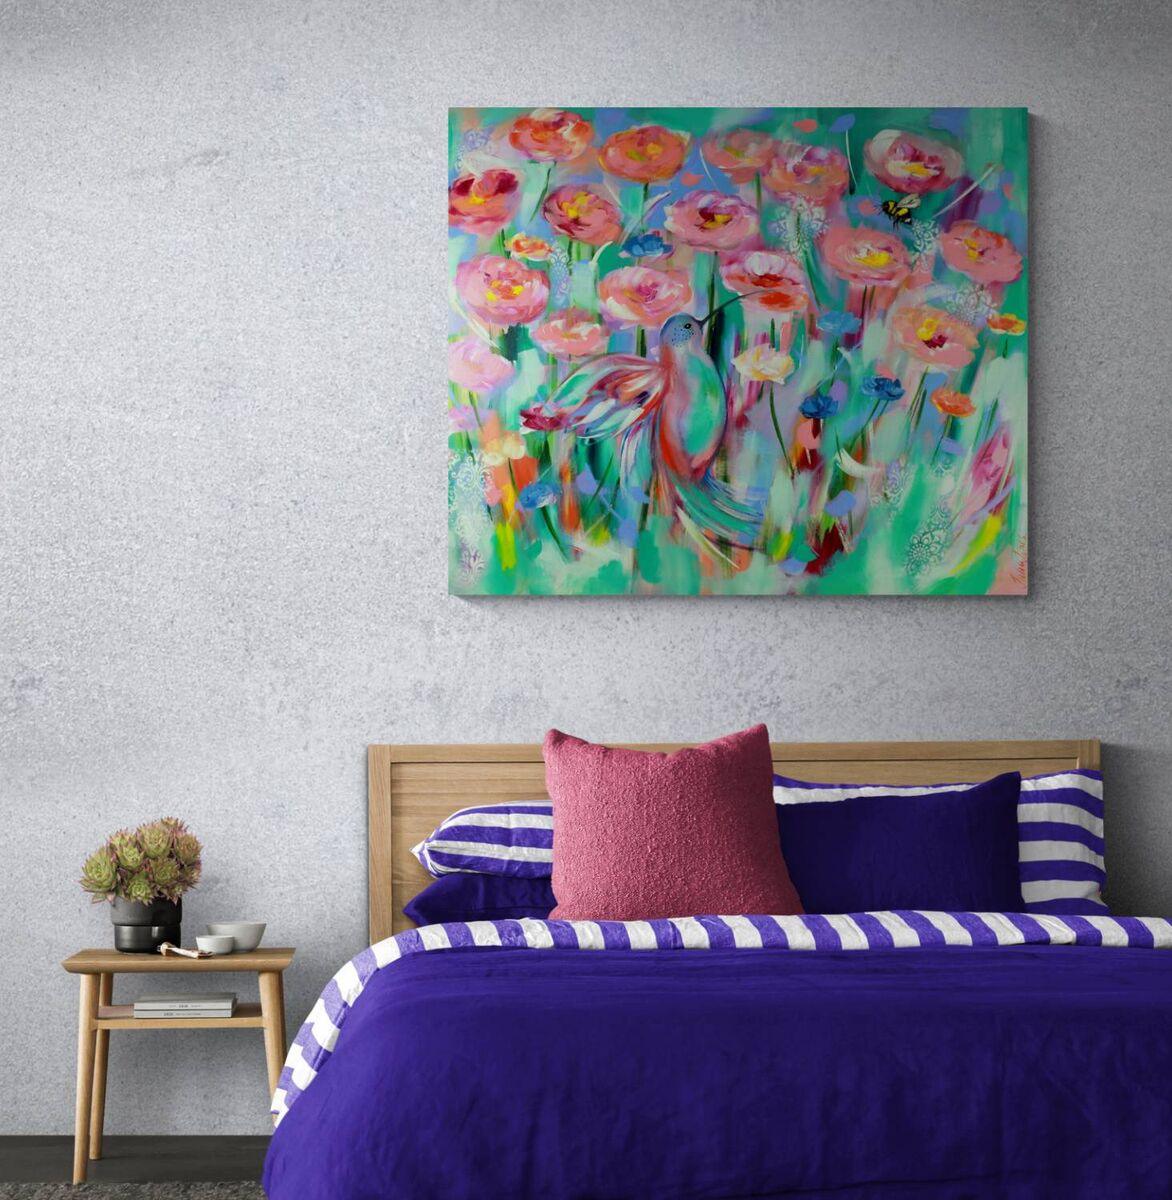 Hummingbird Love - 1.2 x 1m - Original Artwork - Available by Commission